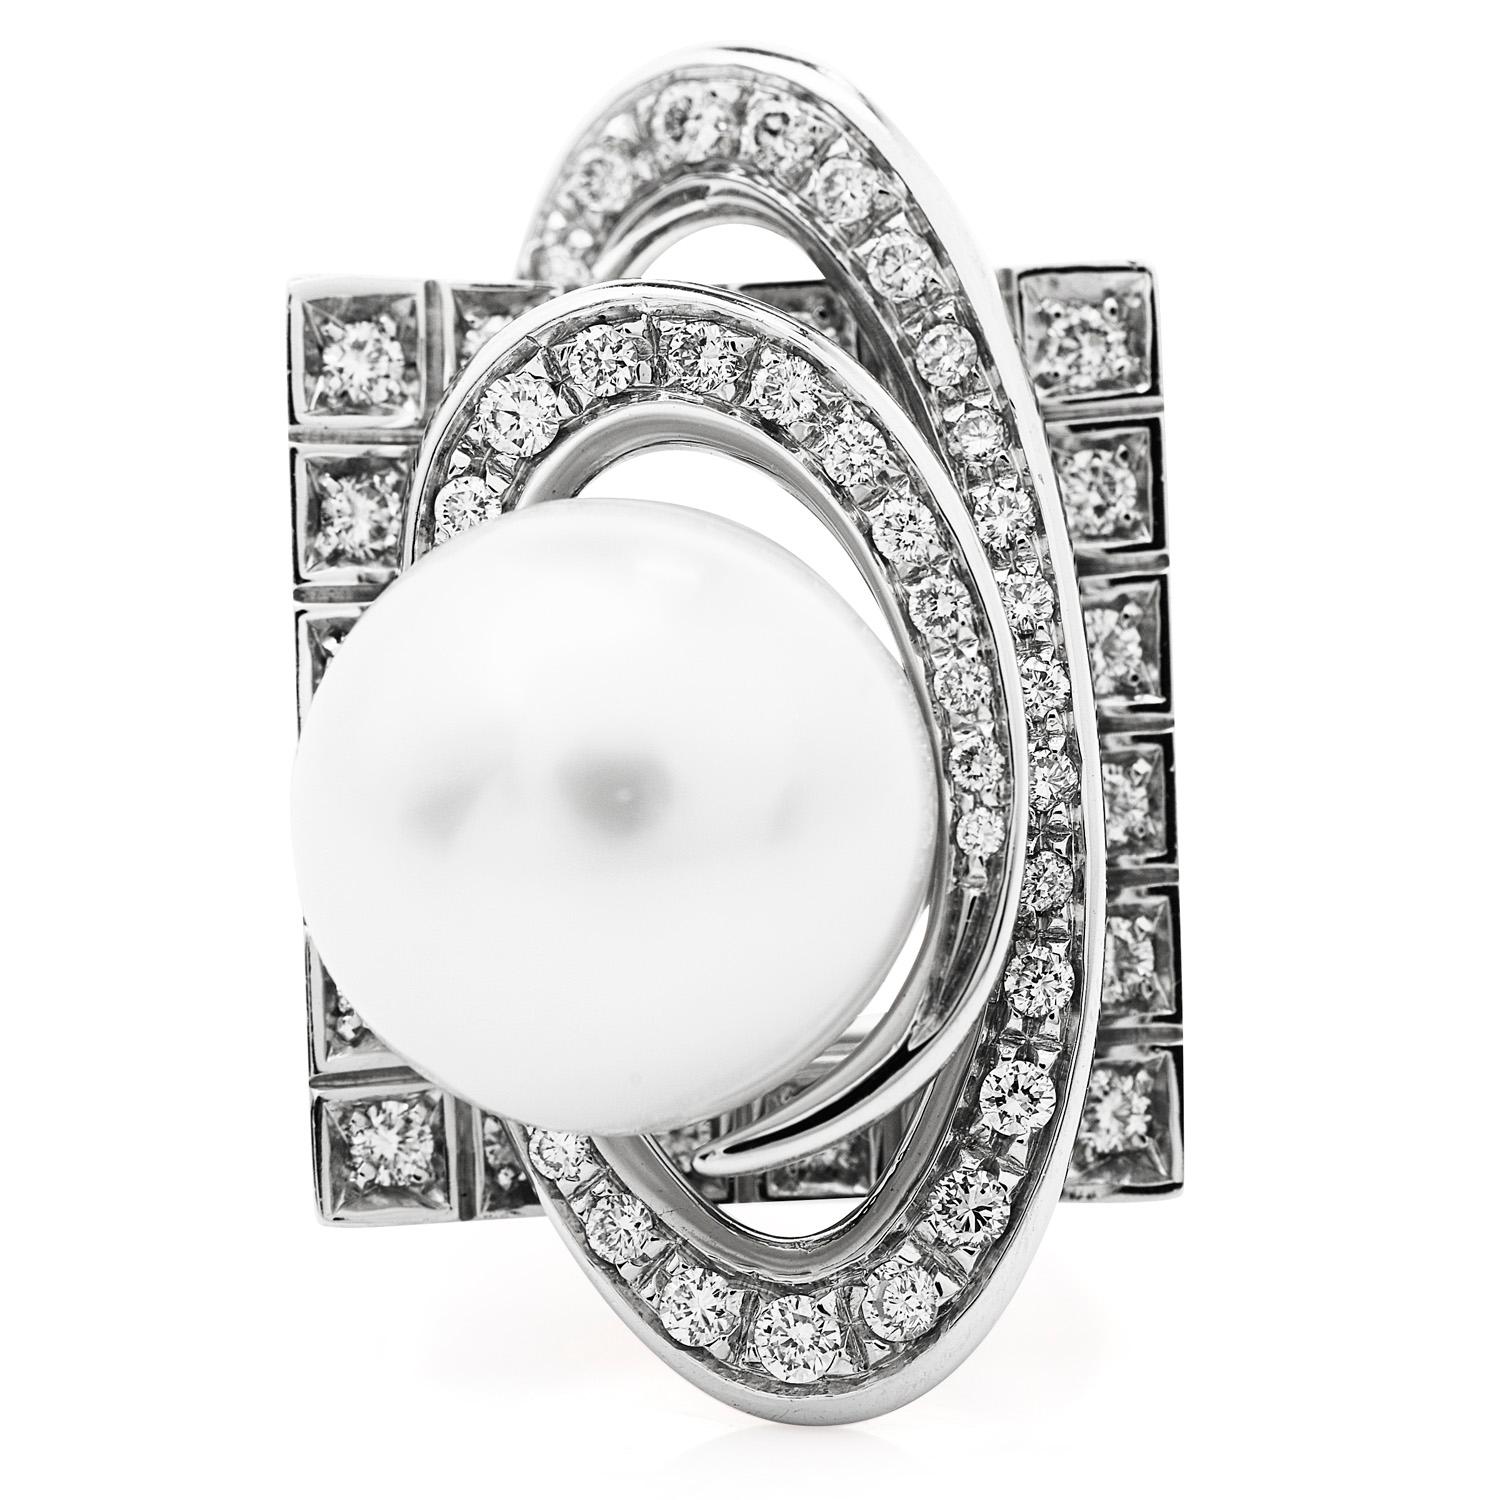 Accessorize to impress at your next cocktail party with this poignant lustrous White south sea pearl Round Cut Diamond Halo 18k white gold ring!  The large 13mm center pearl is surrounded by a classic diamond round cut halo. These remarkable